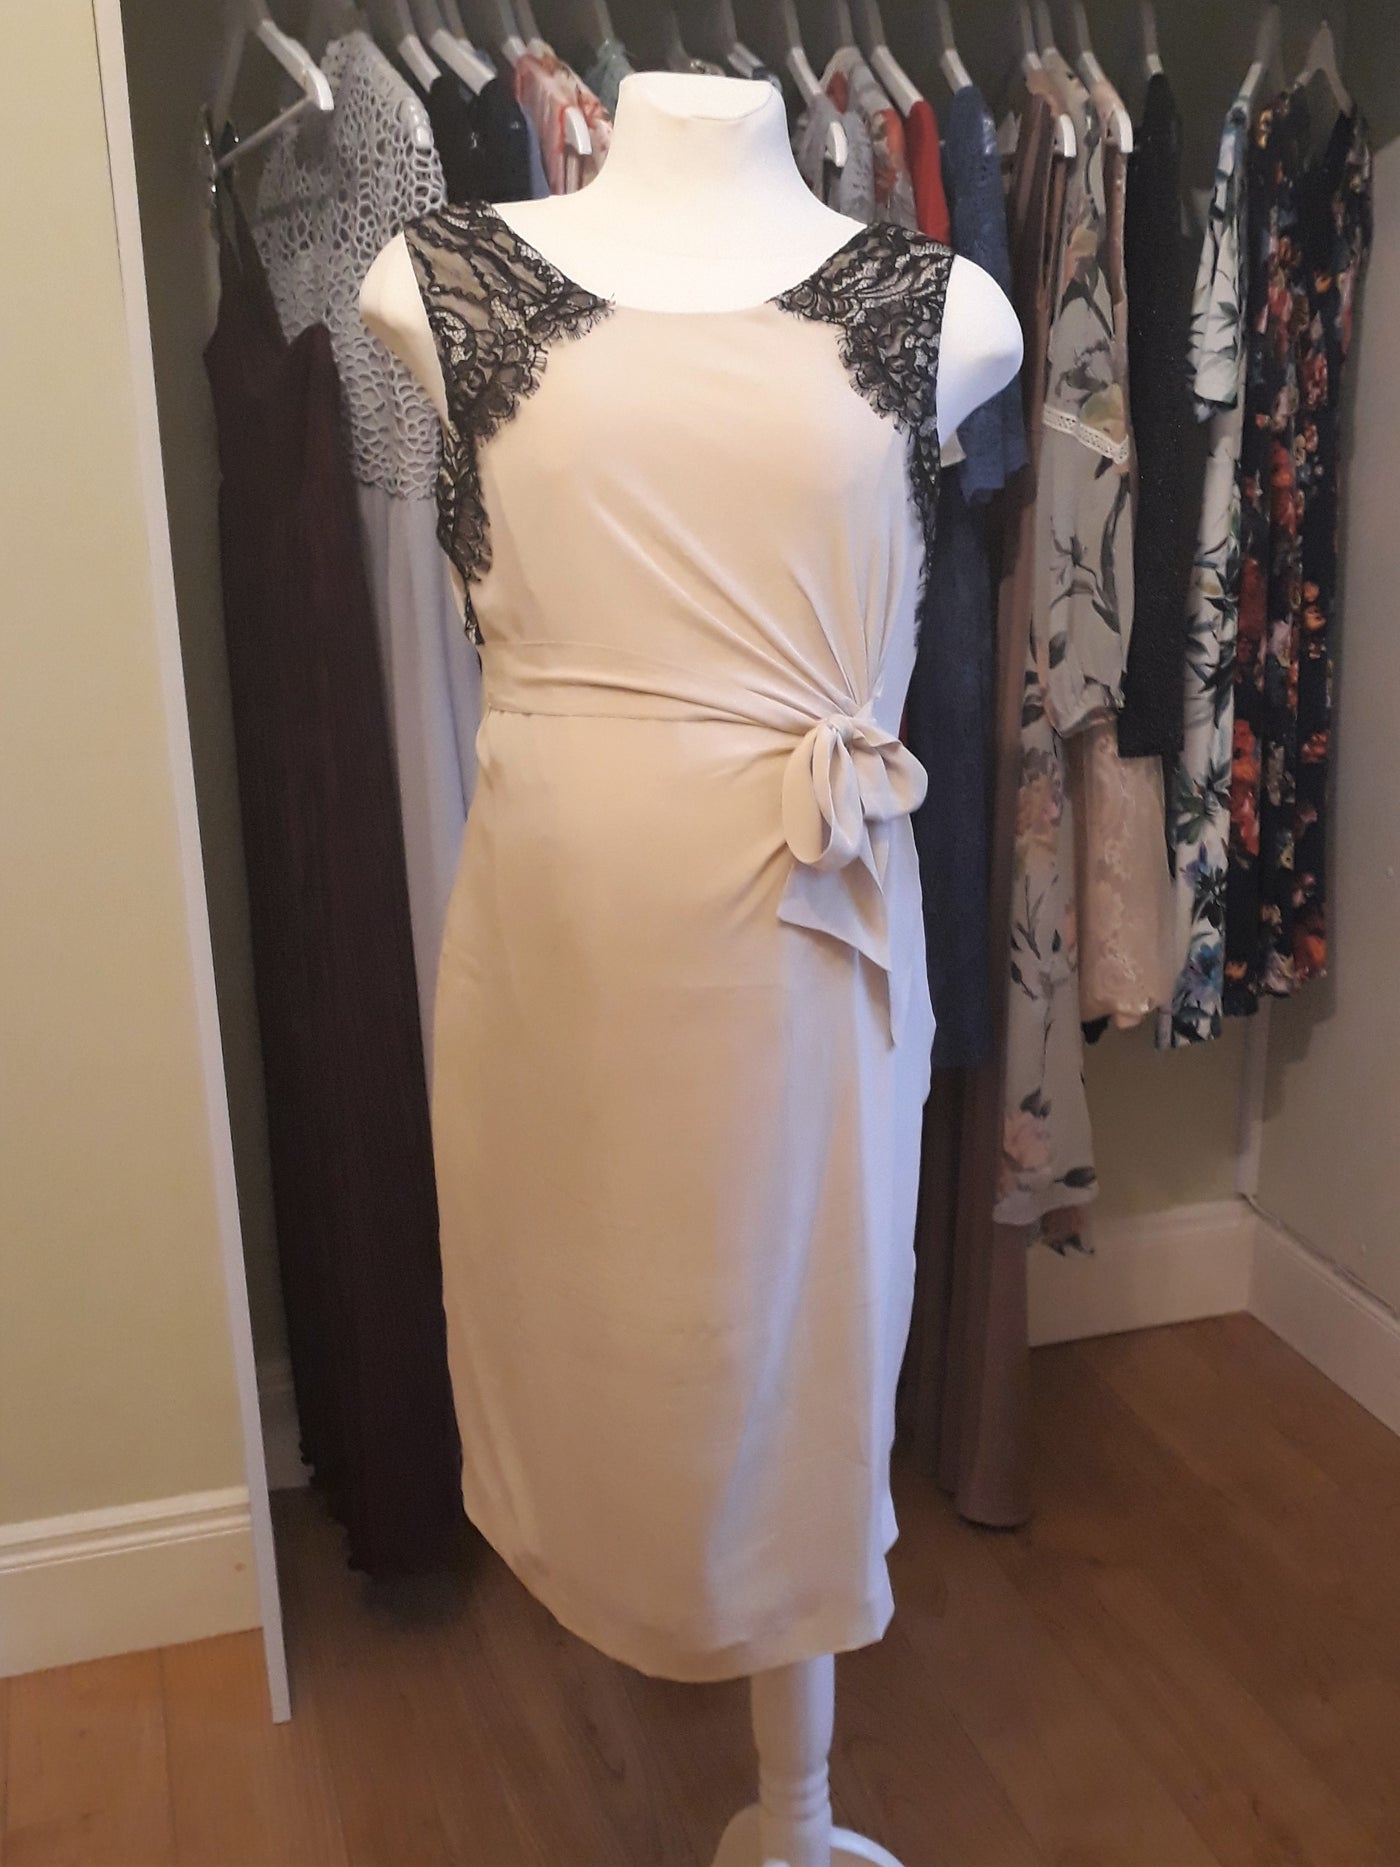 Seraphine Luxe Nude tie dress with black lace shoulders - Size 12